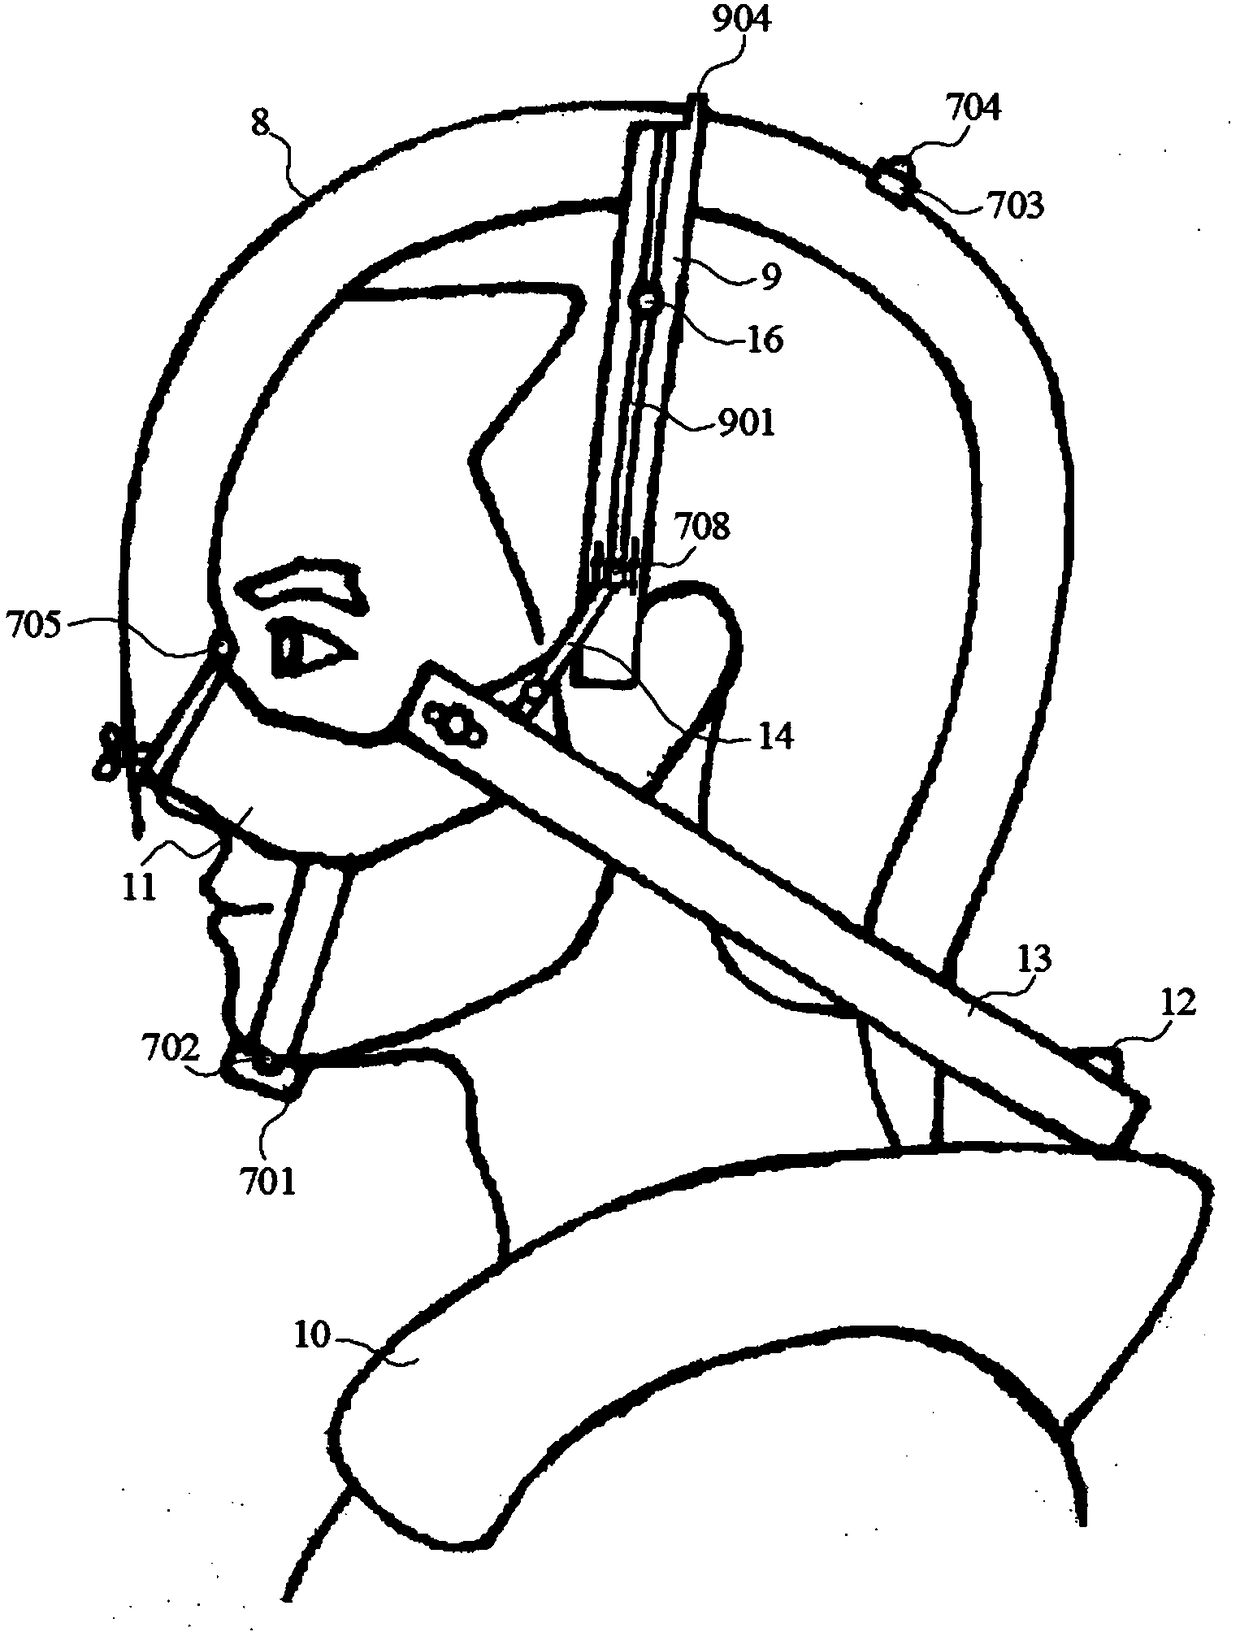 Method and device for three-dimensionally positioning heads of human bodies and modeling scalp states